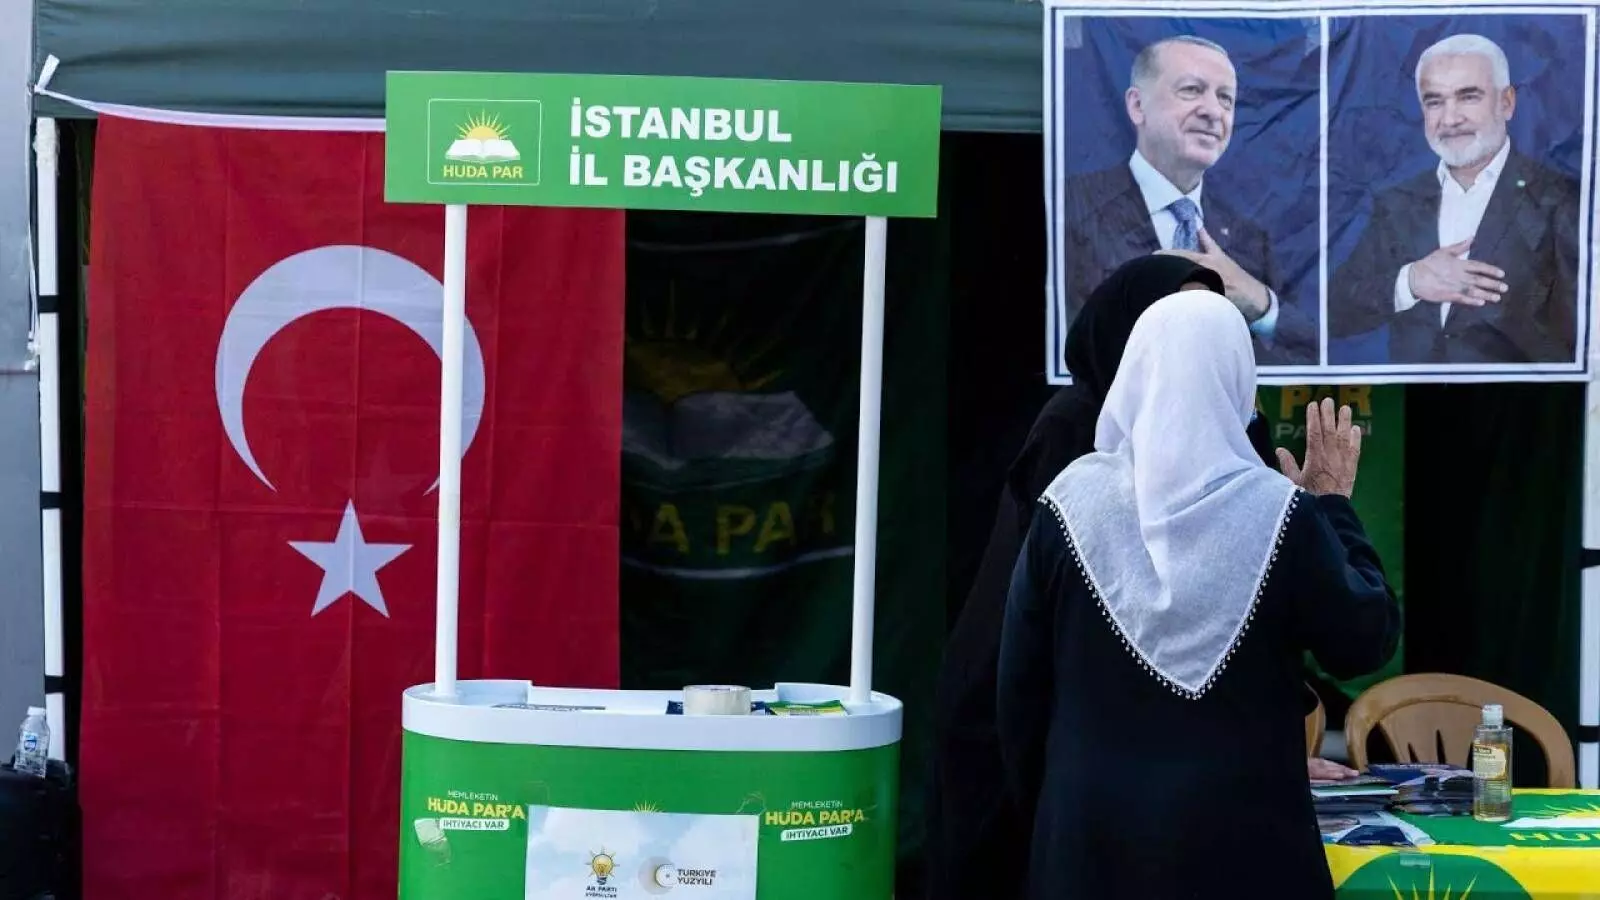 EU seeks transparency in Turkey’s upcoming elections